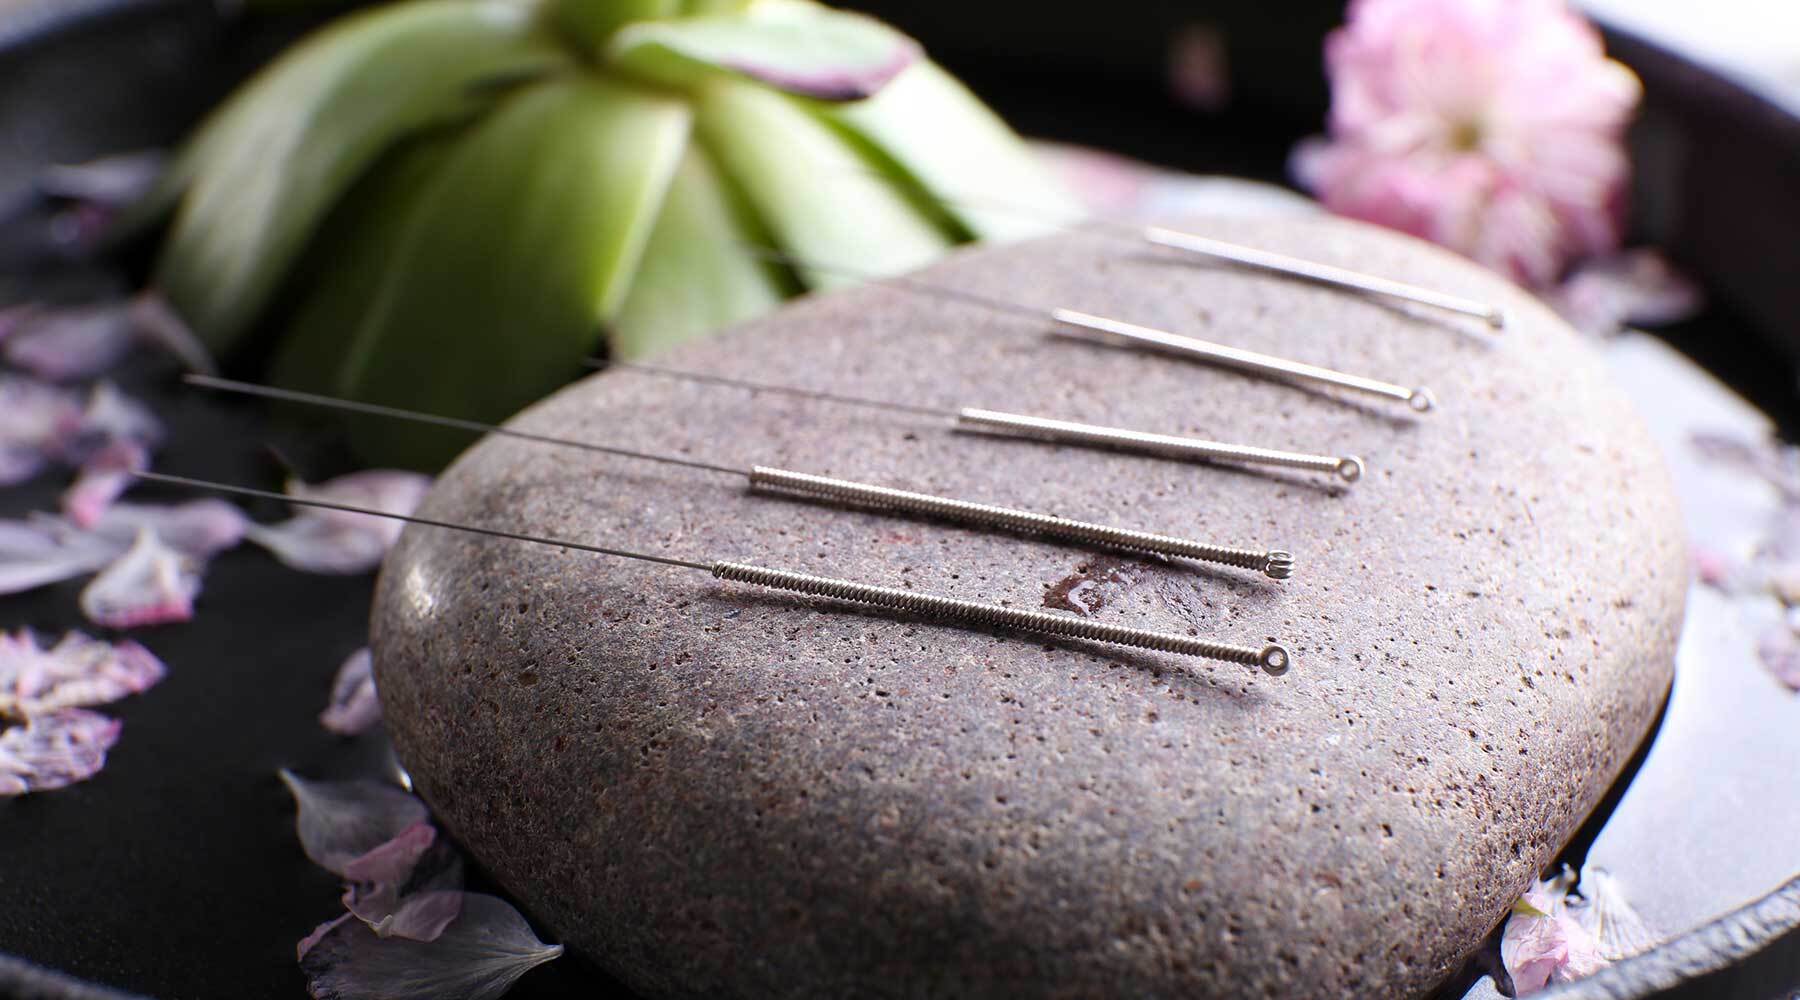 How Do You Overcome A Fear Of Acupuncture Needles?